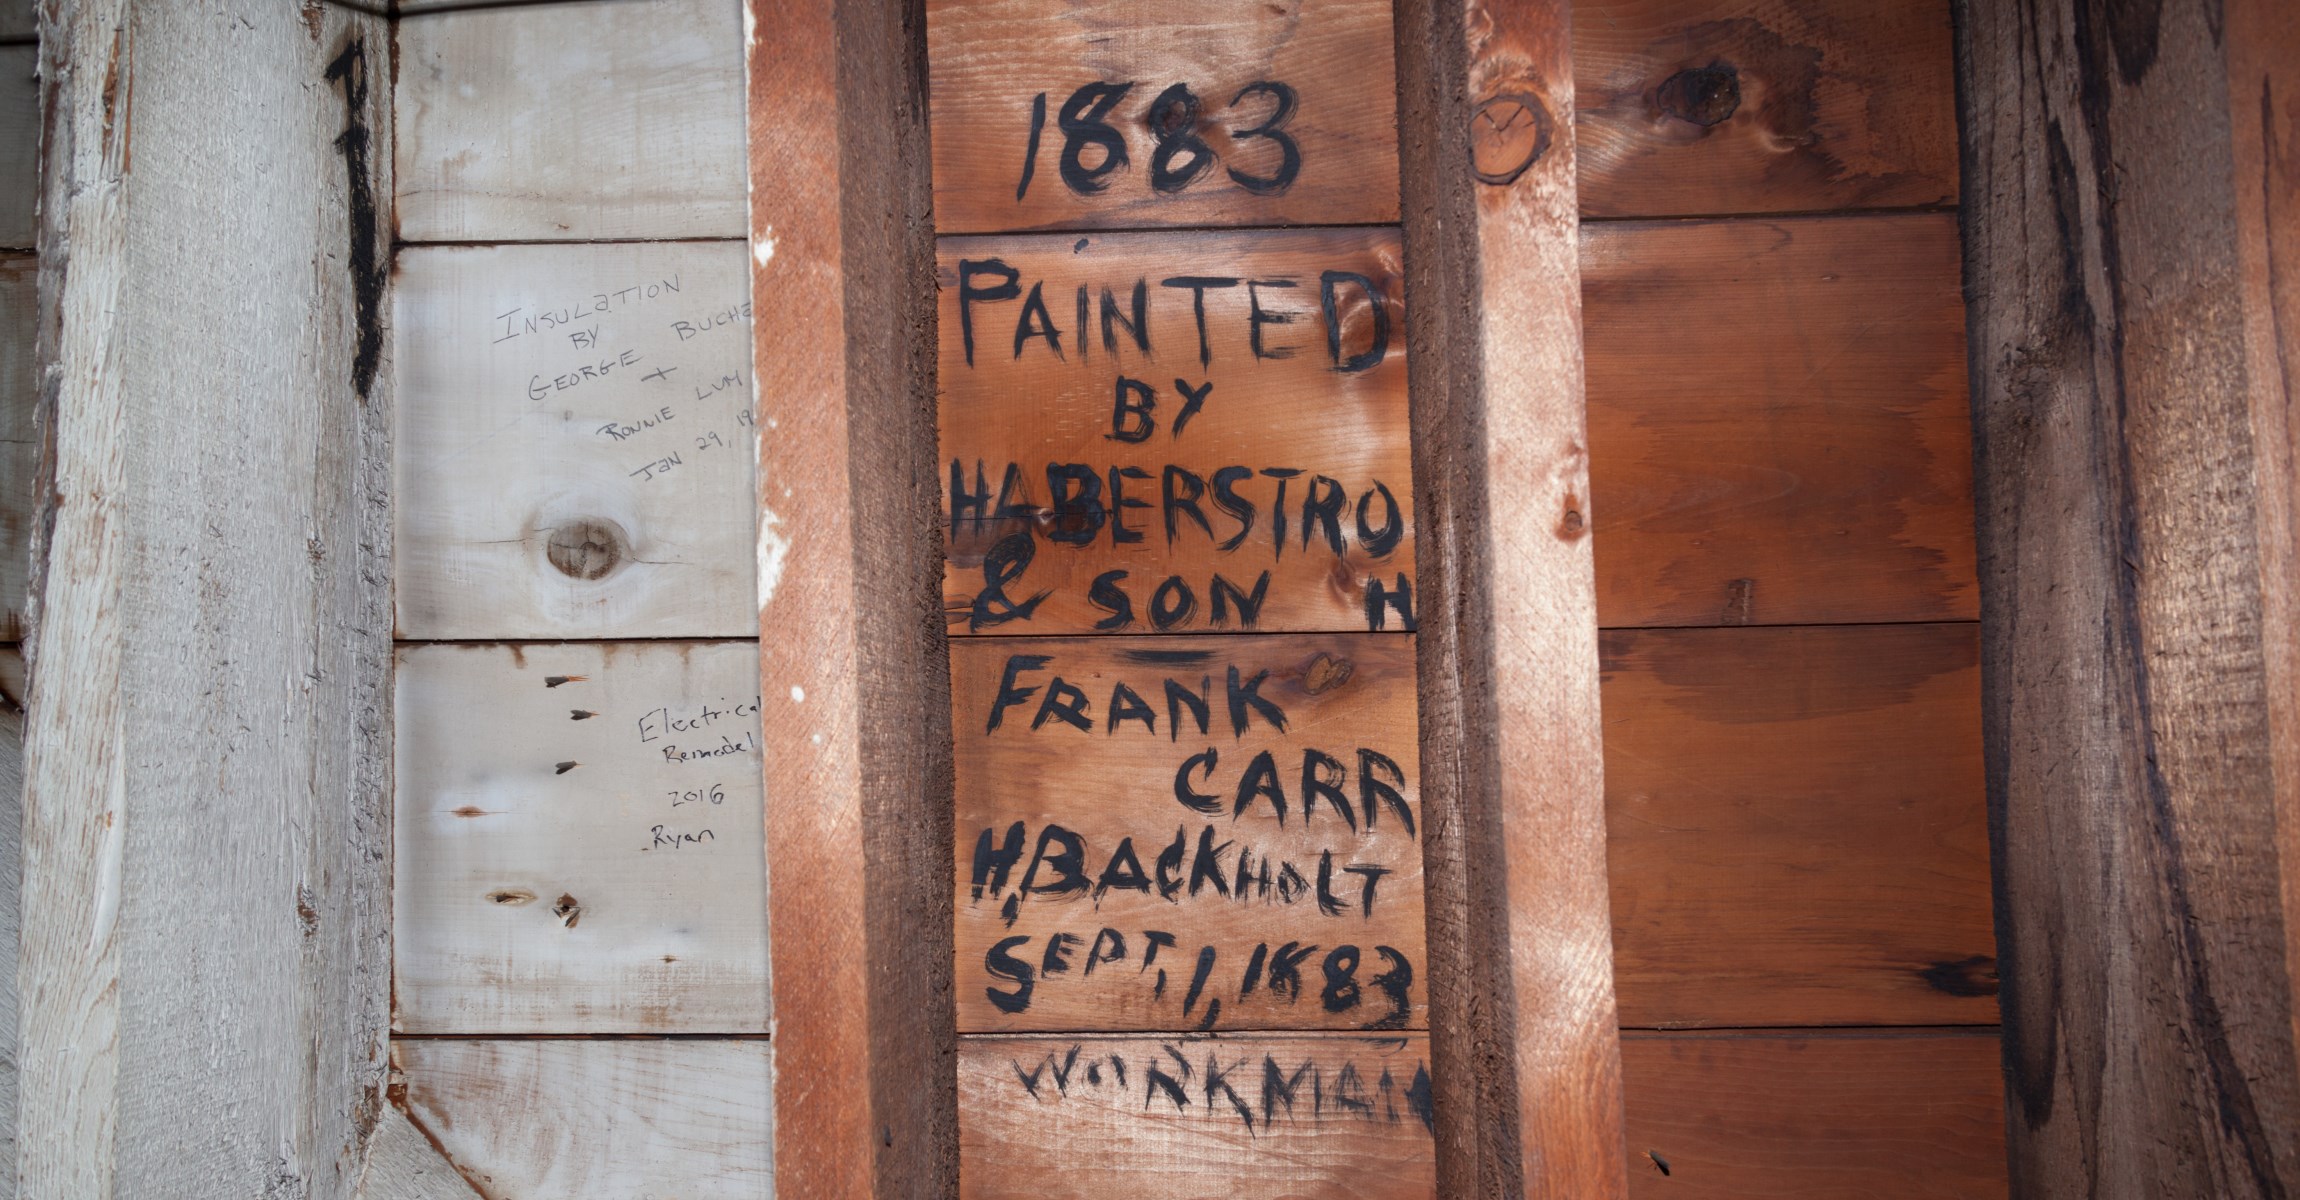 Black writing on wooden wall between rafters, text reads: 1883 Painted by Haberstroh & Son Frank Carr H. Backholt Sept 1, 1883 Workman